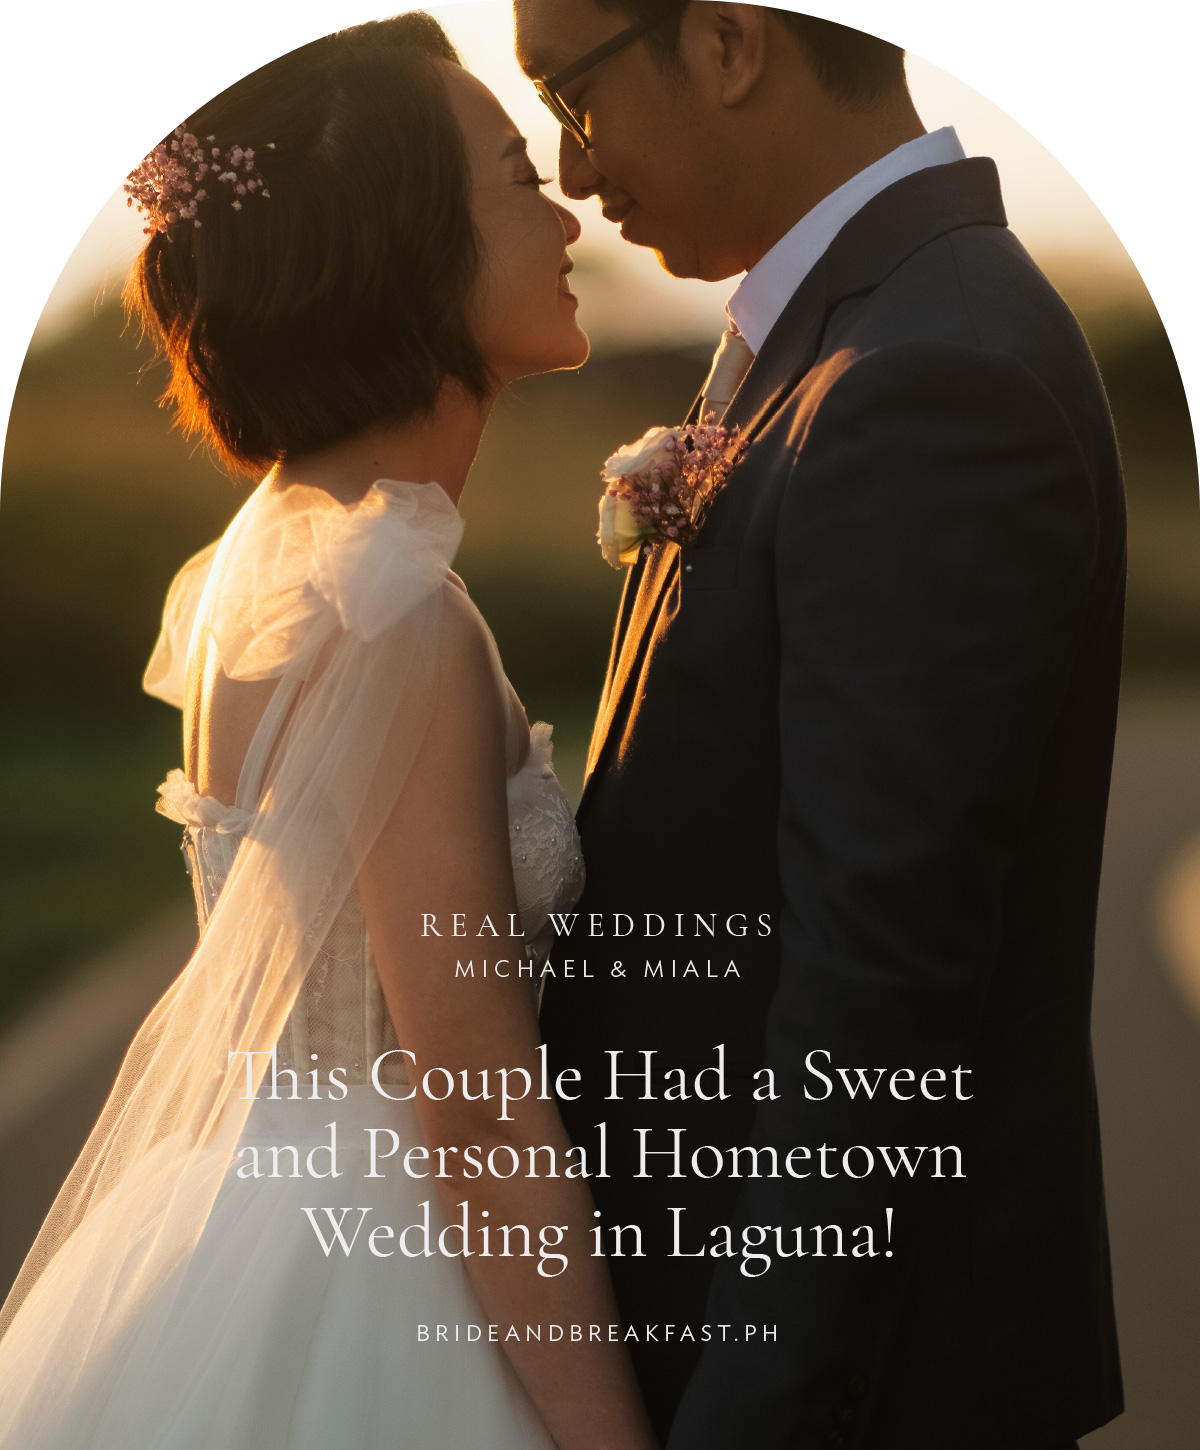 This Couple Had a Sweet and Personal Hometown Wedding in Laguna!